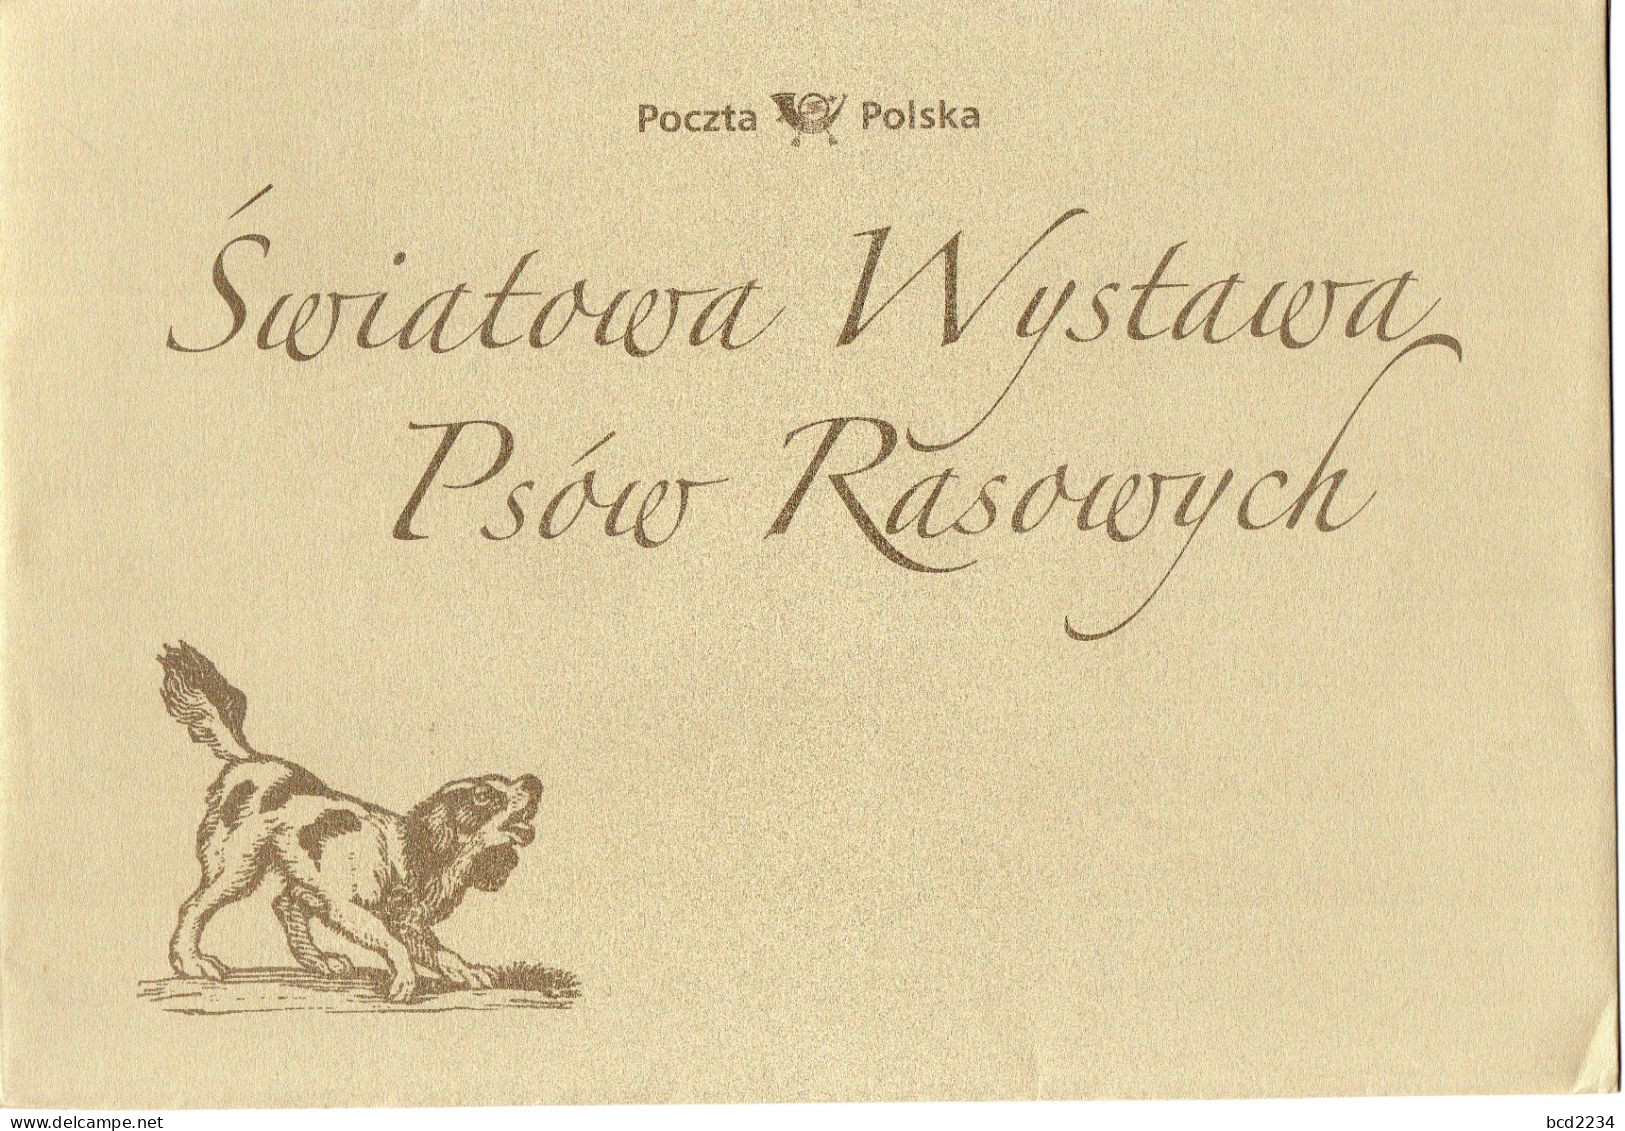 POLAND 2006 RARE POLISH POST OFFICE LIMITED EDITION FOLDER: SHEET OF 20 STAMPS OF WORLD EXHIBITION SHOW PEDIGREE DOGS